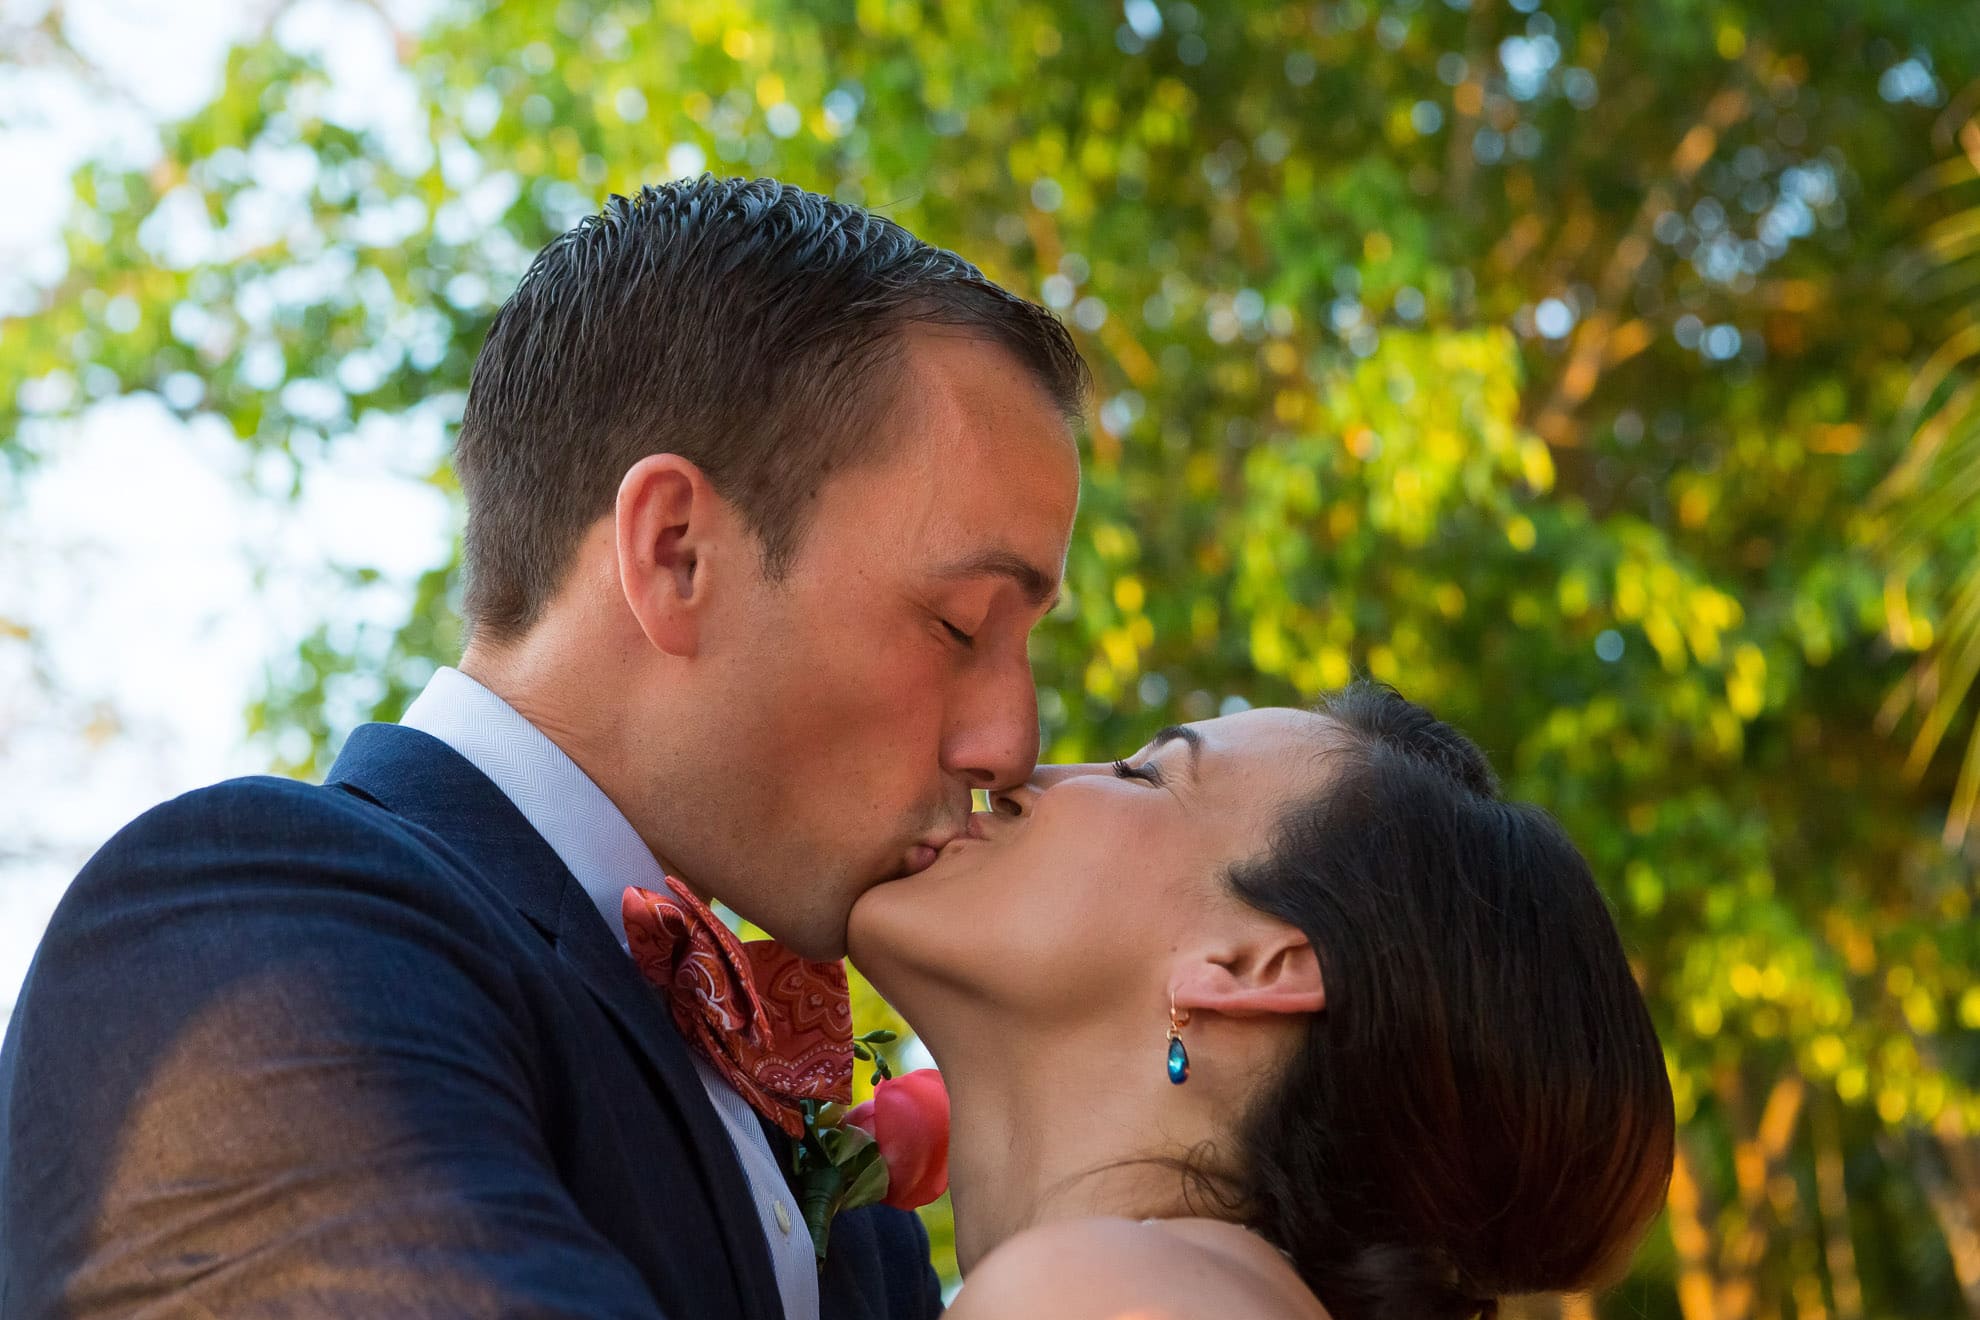 First Kiss at wedding in Costa Rica